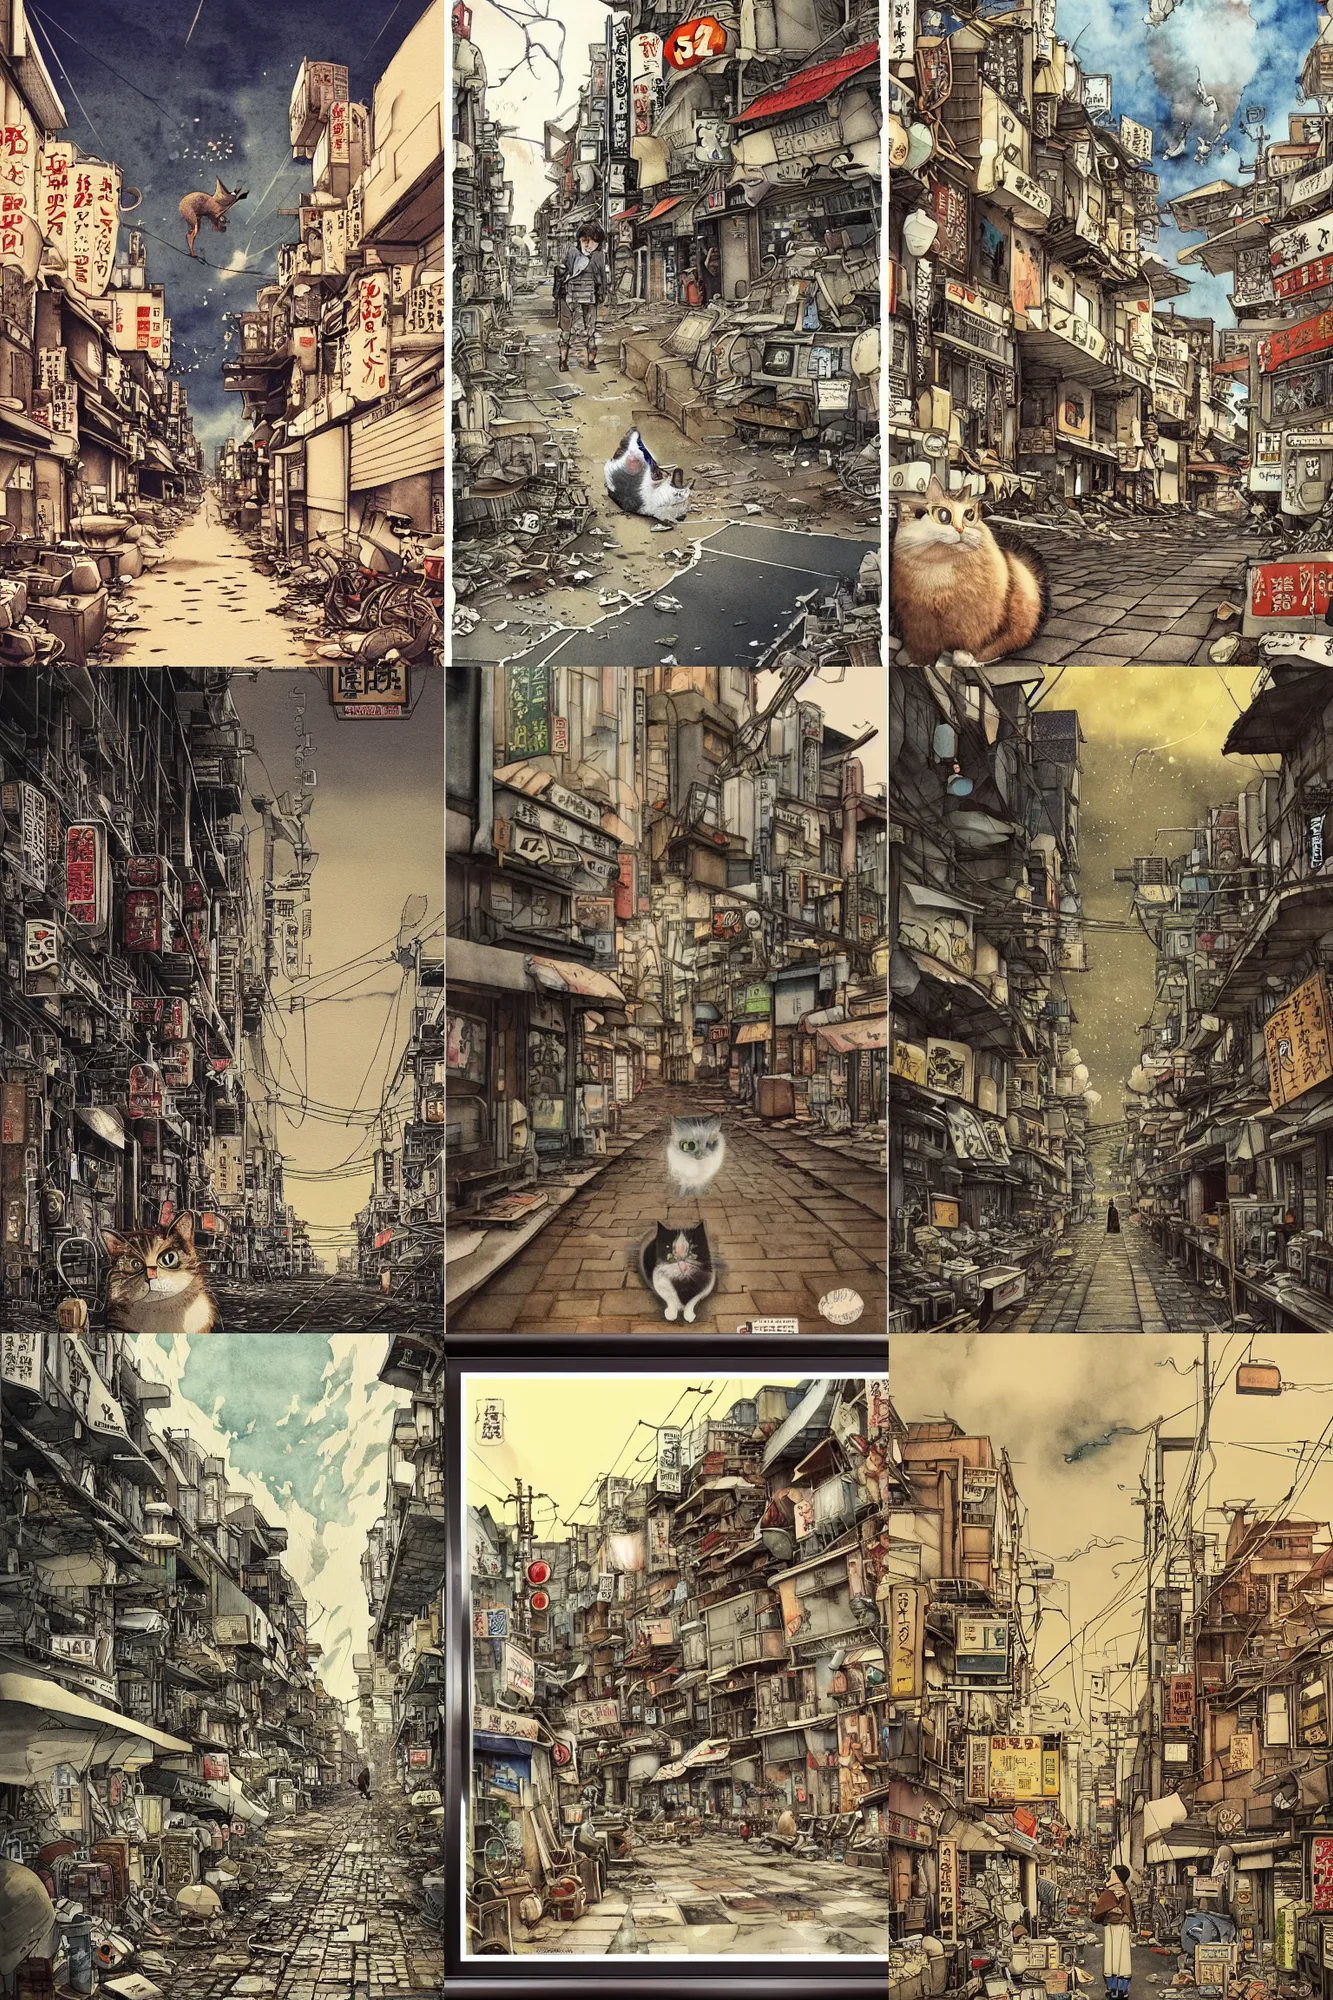 Prompt: incredible miyazaki, movie poster, low angle, tatsuyuki tanaka, detailed watercolor, back lit, paper texture, movie scene, cat in the street, close up cat, catching mice in a deserted dusty shinjuku junk town, old pawn shop, bright sun bleached ground , spot light, pale beige sky, junk tv, texture, brown mud, dust, overhead wires, telephone pole, dusty, dry, pencil marks